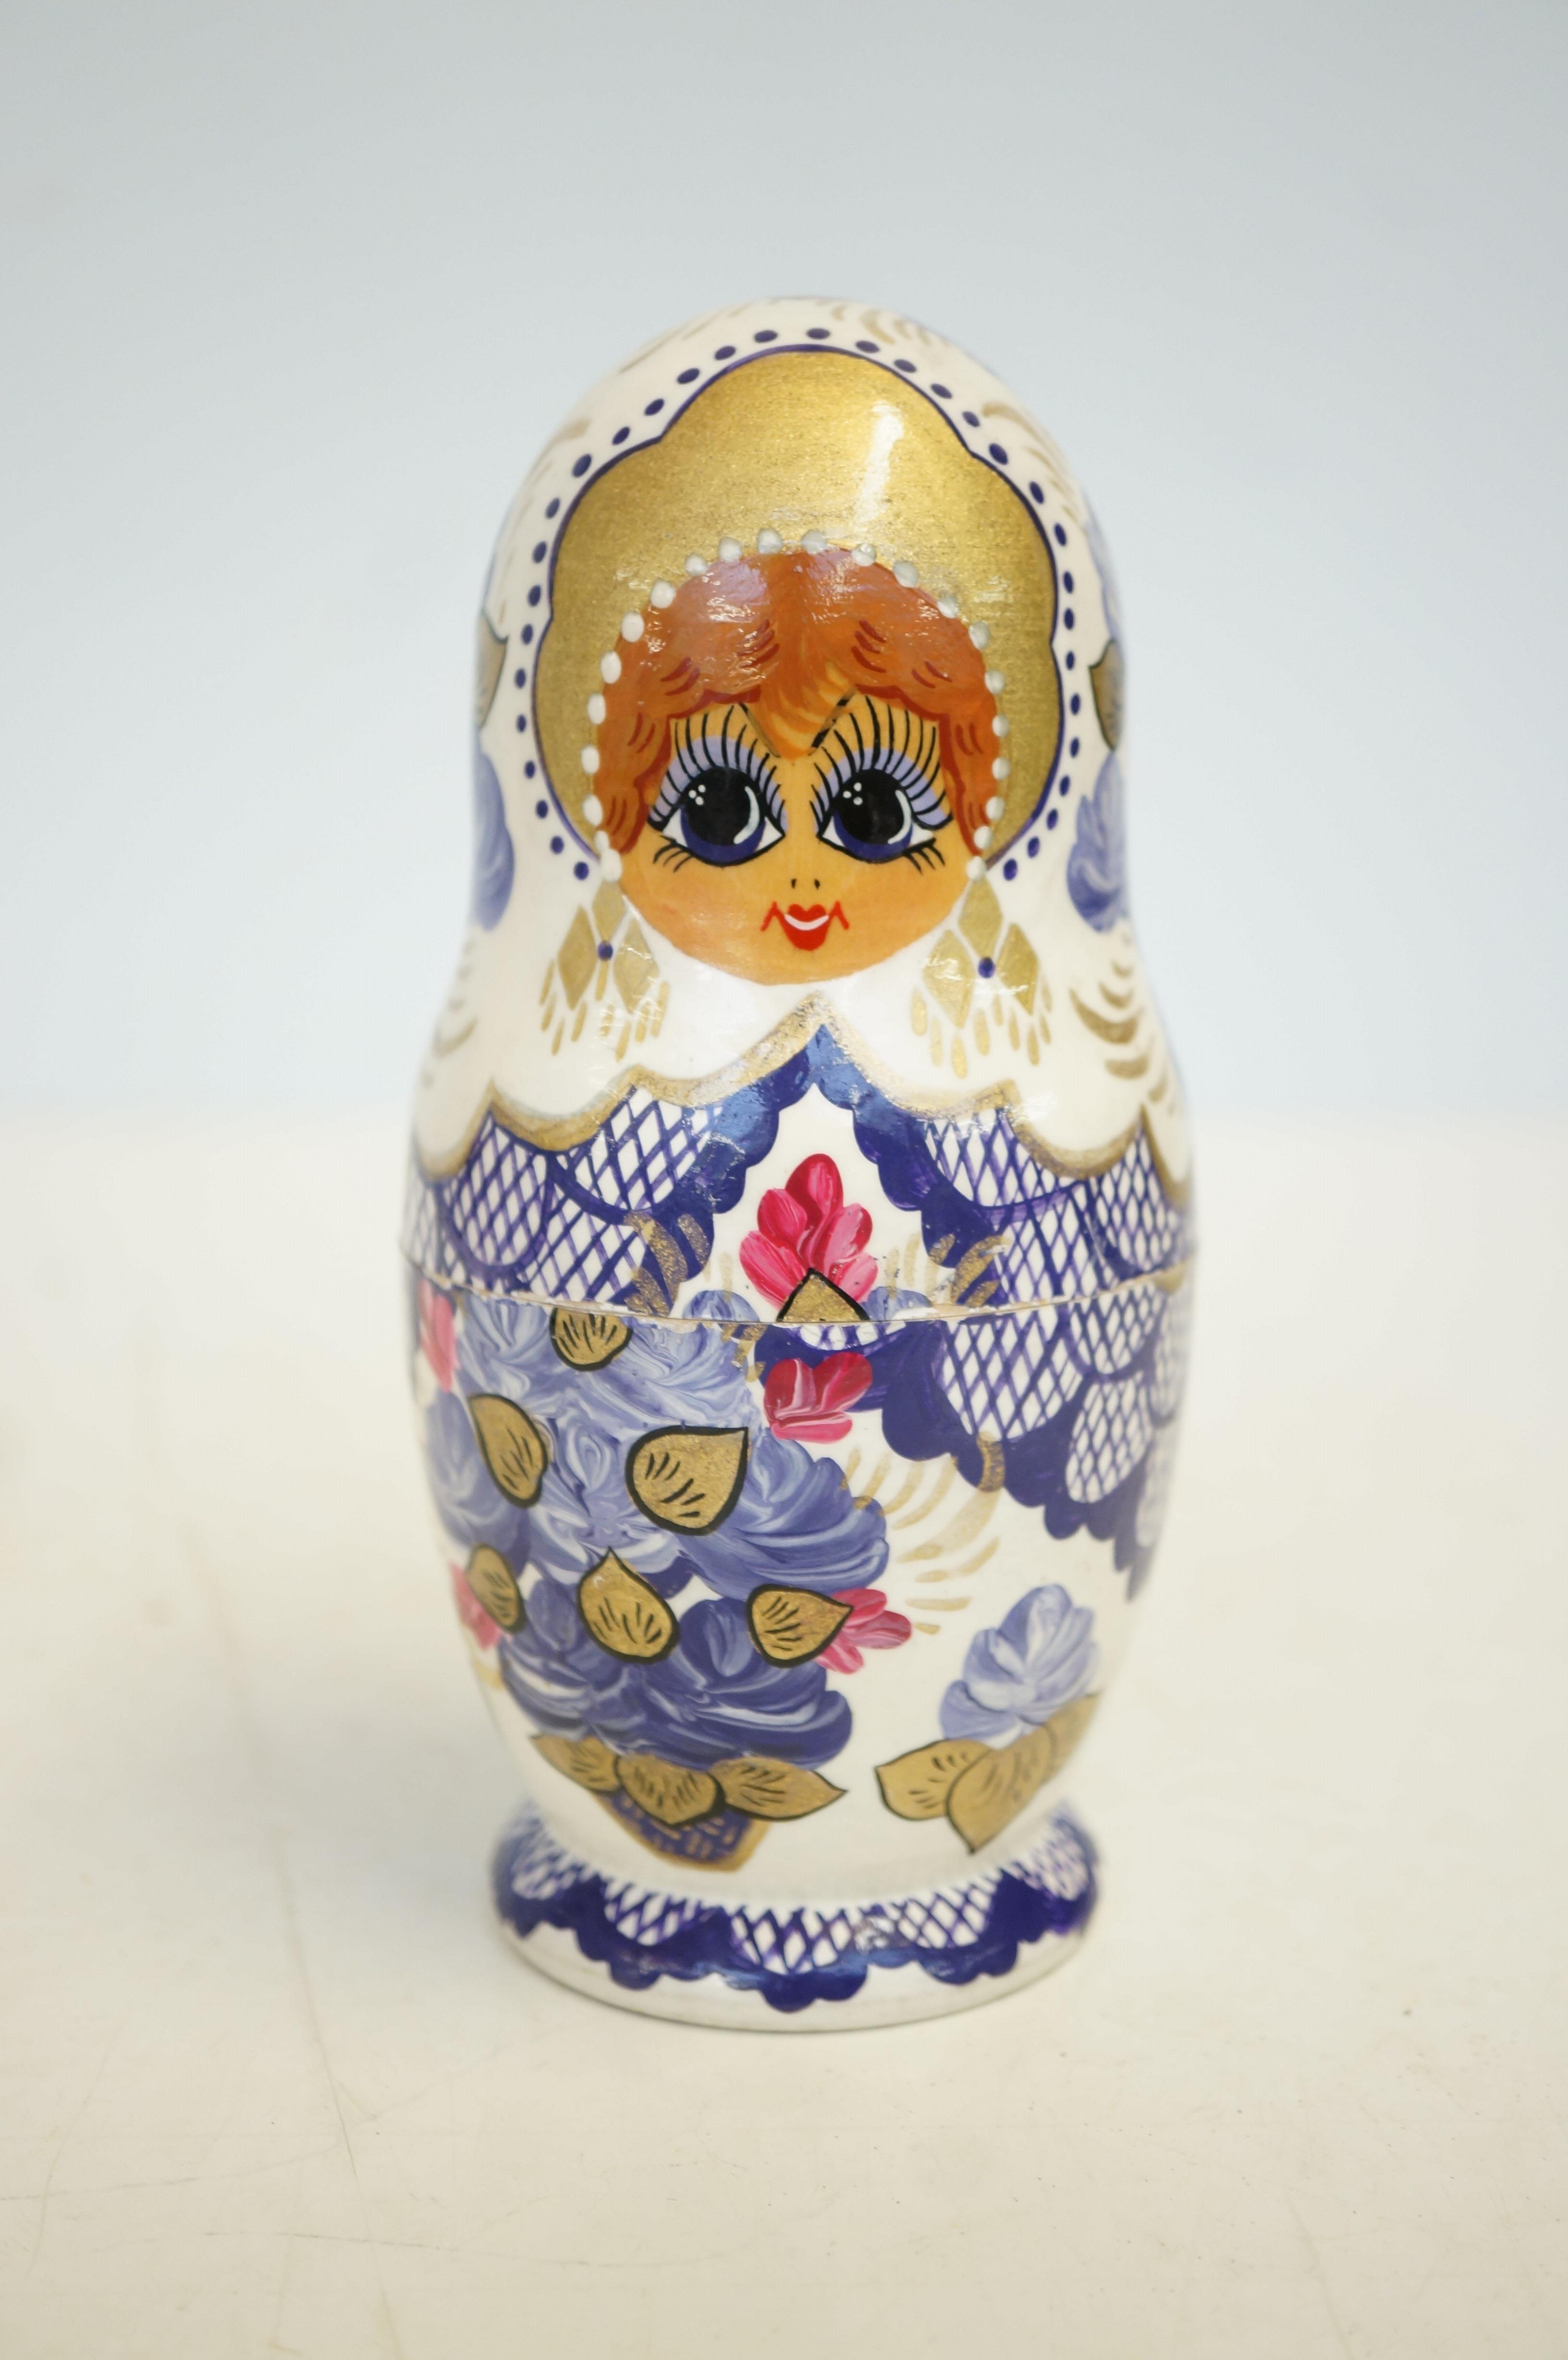 1993 Russian doll - complete